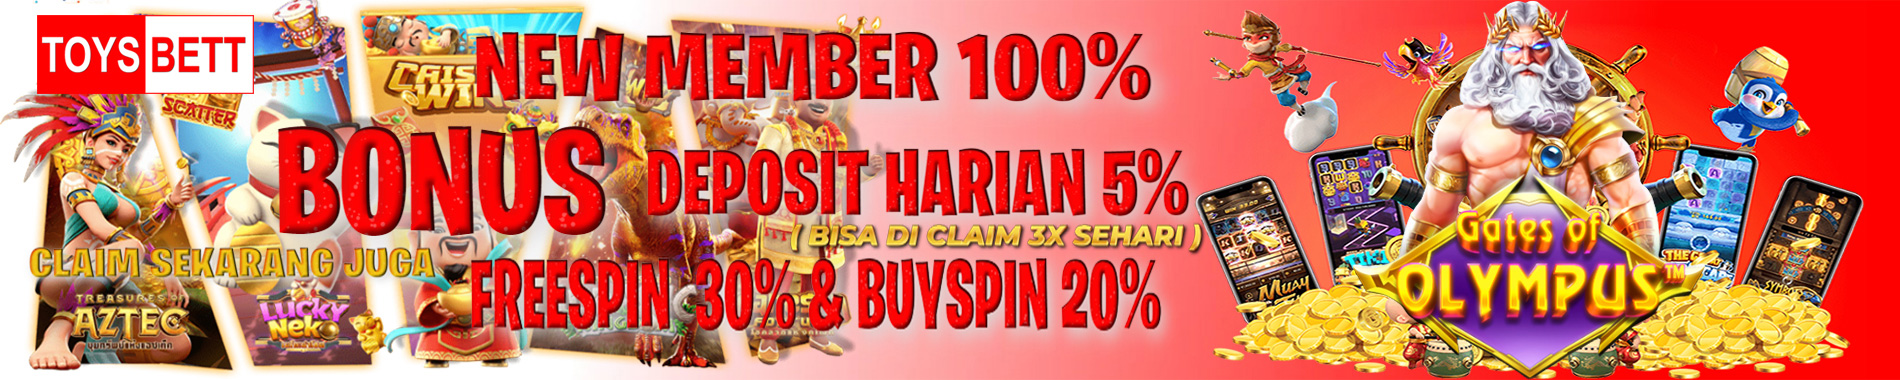 event freespin 30%